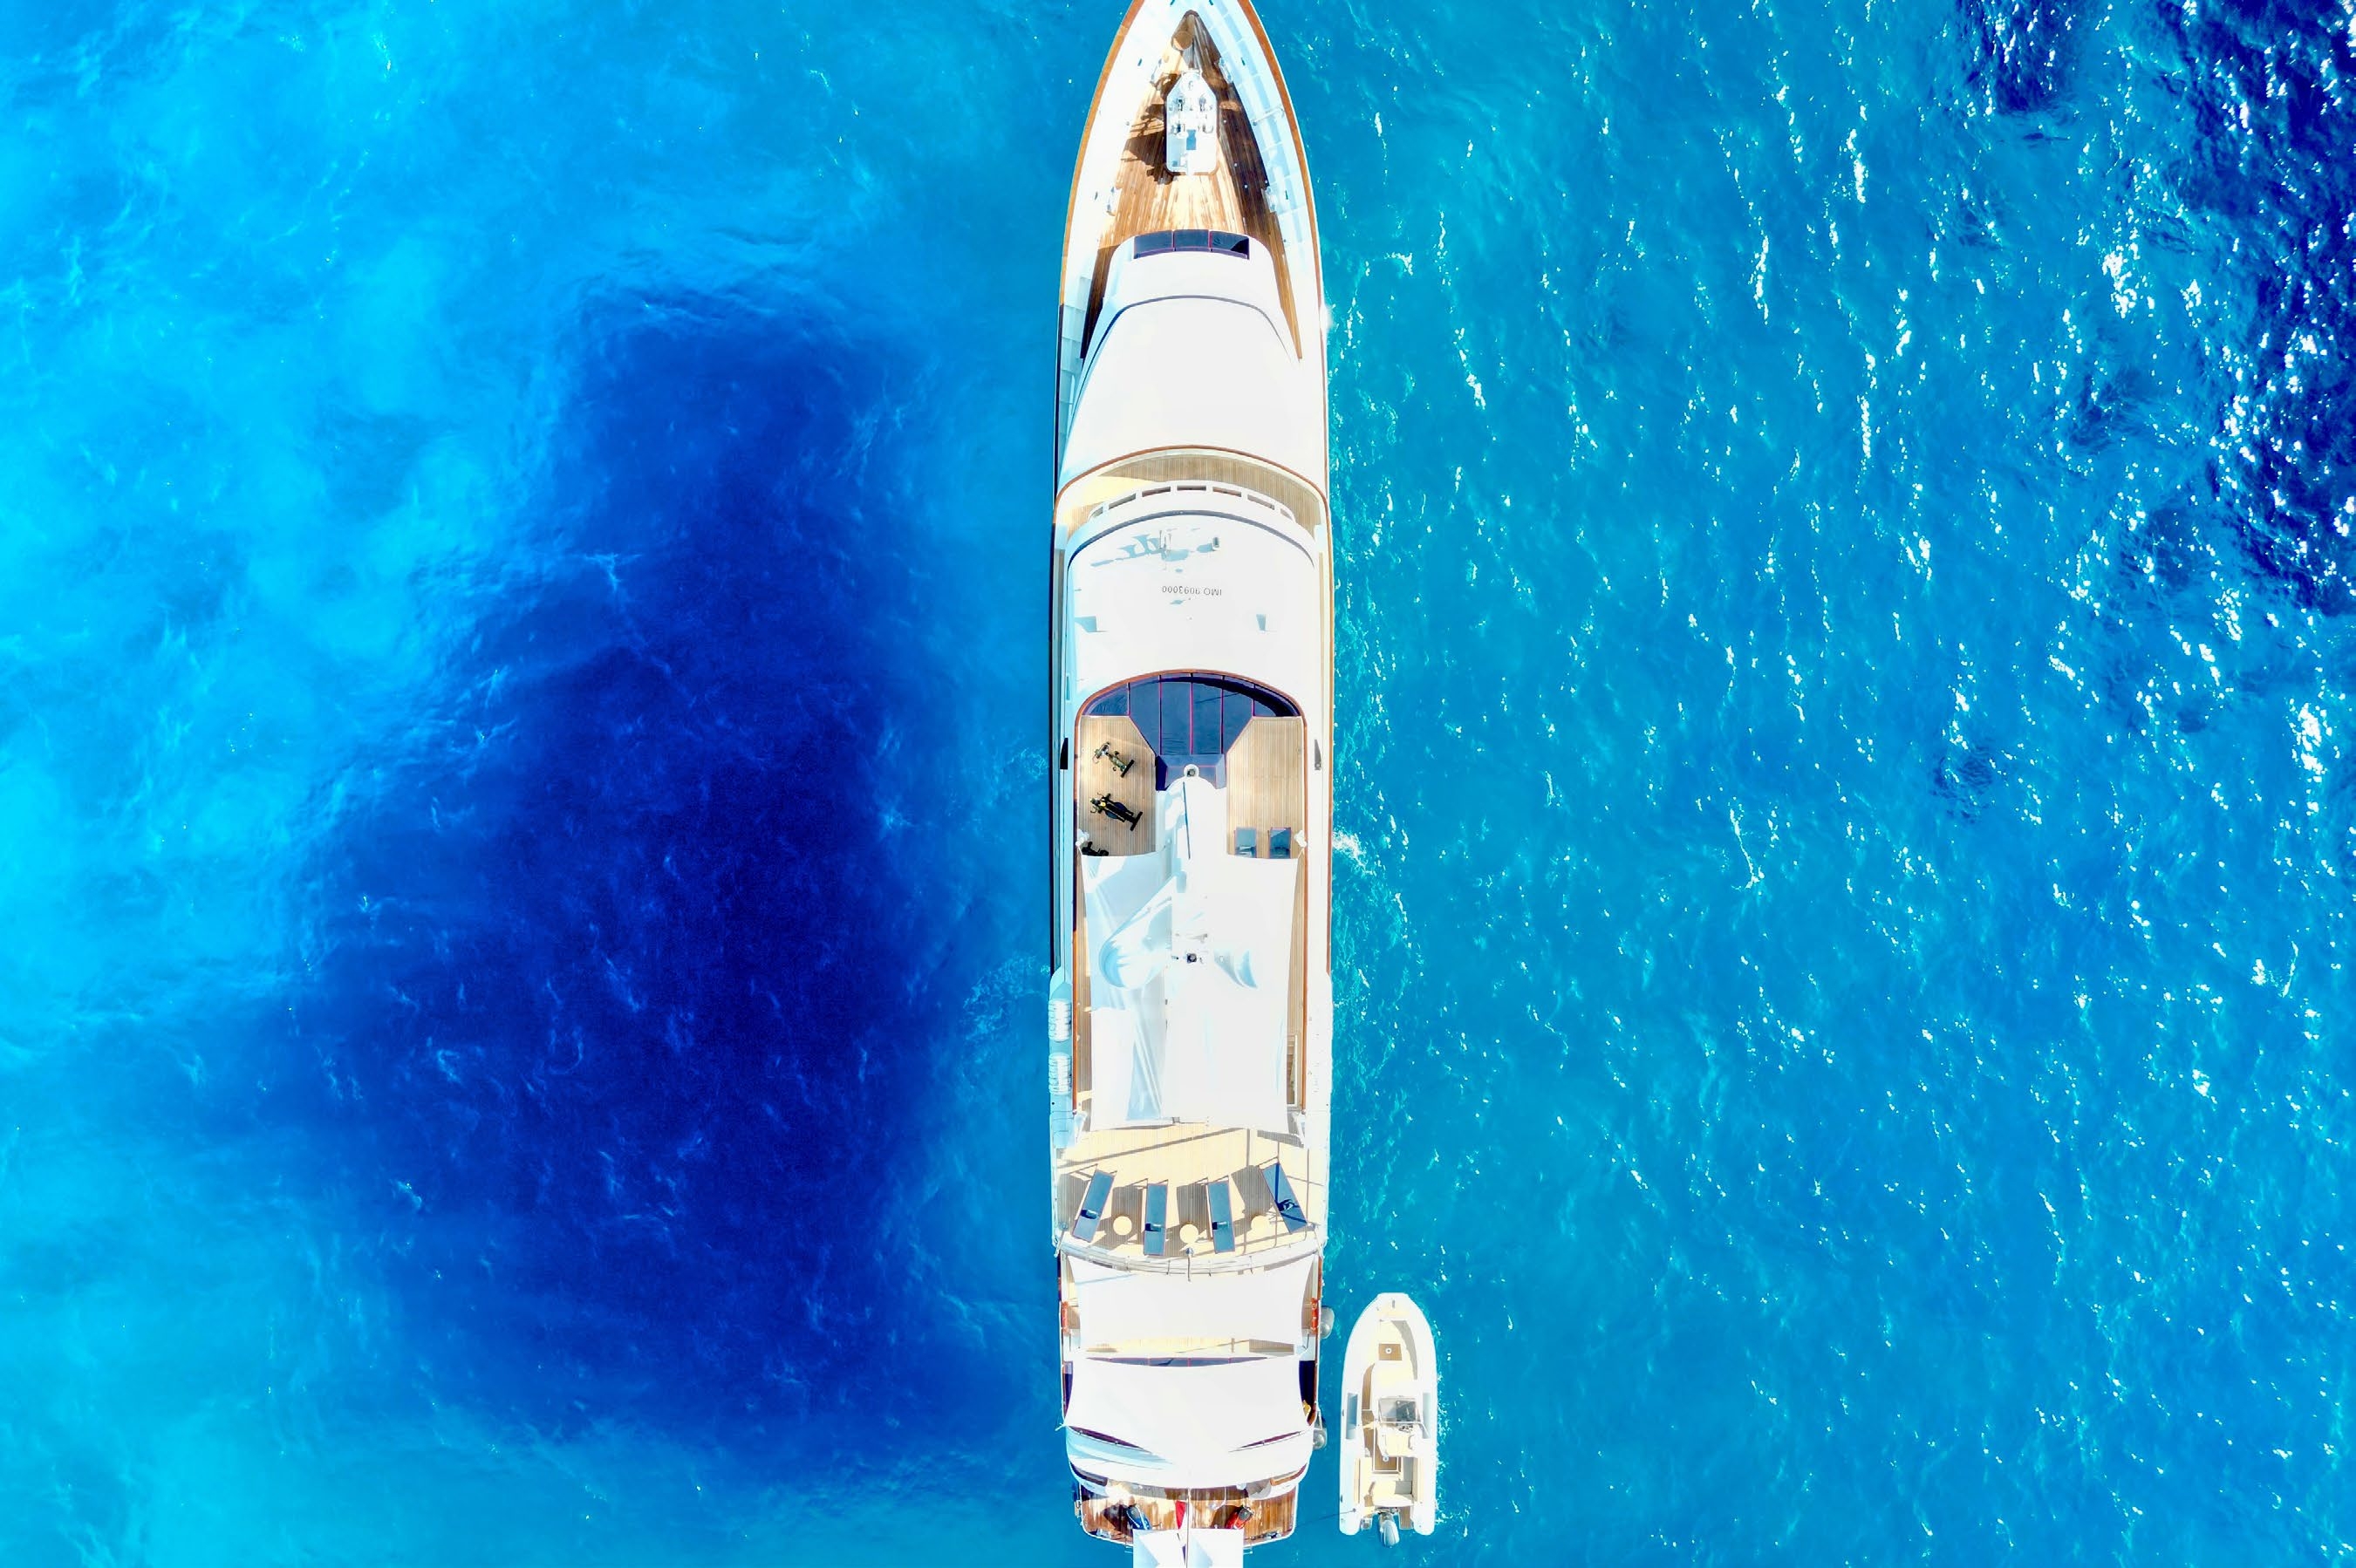 From Above At Anchor